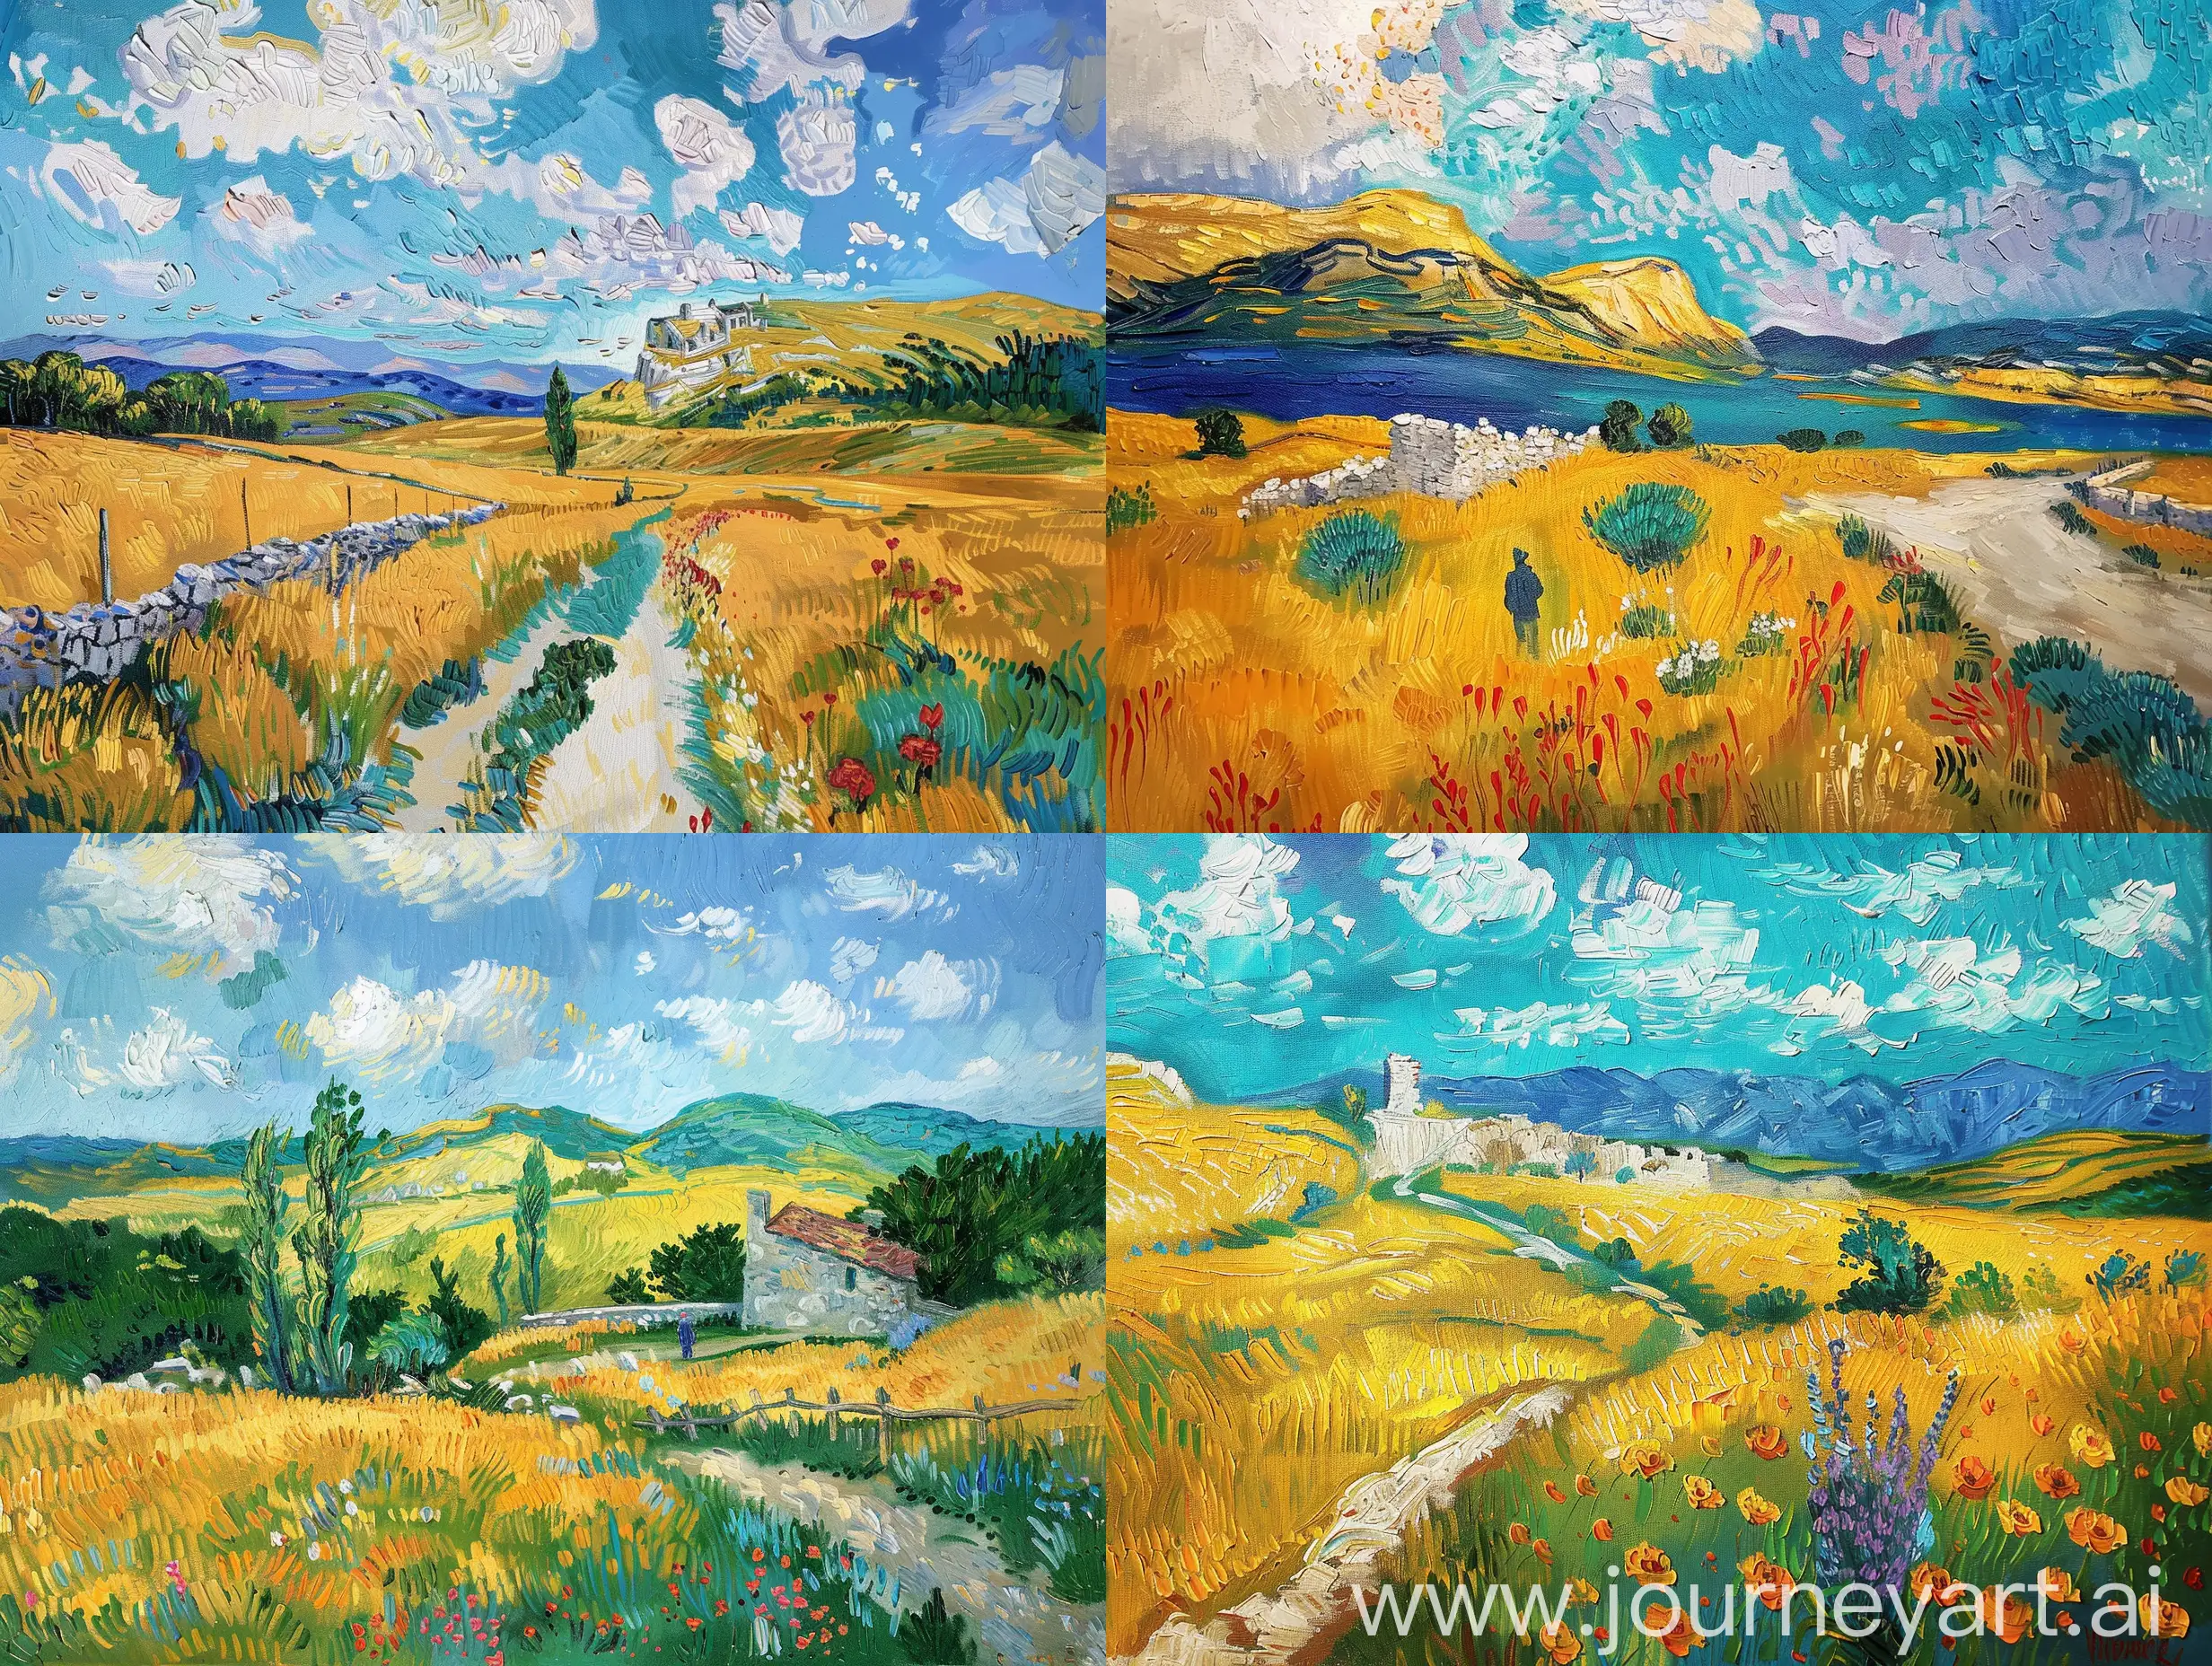 Vibrant-Van-Gogh-Style-Oil-Painting-of-Mountain-Landscape